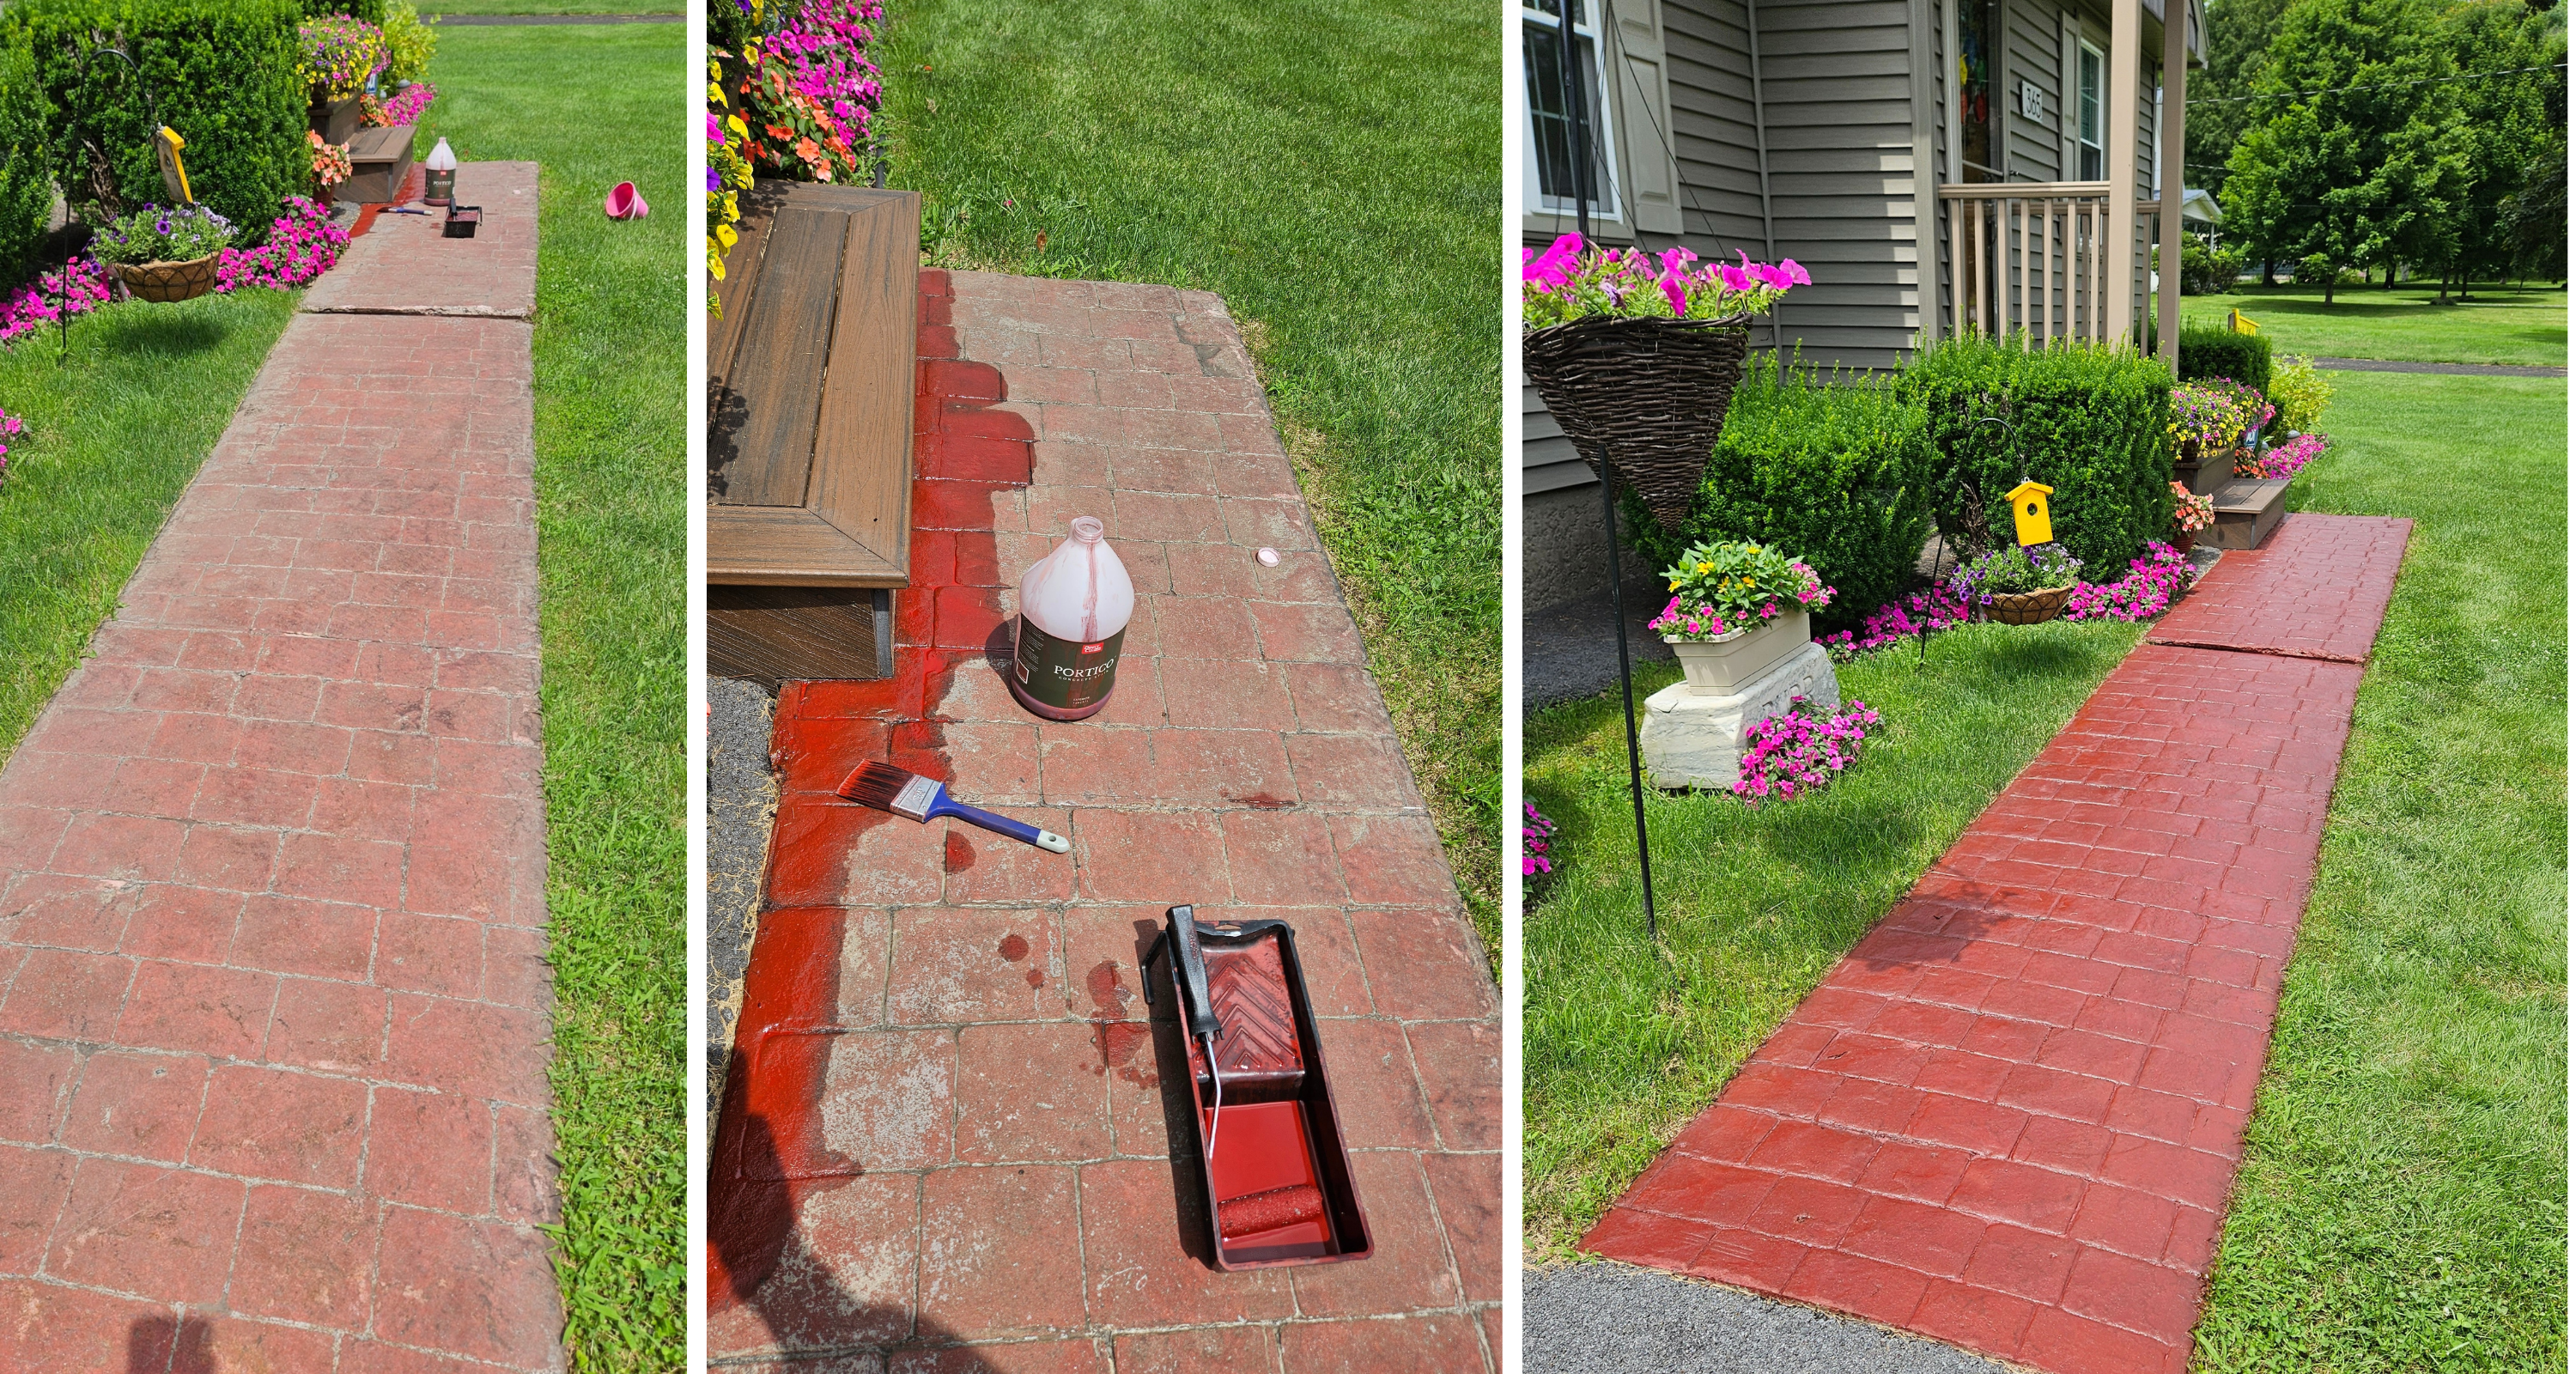 A series of three images showing the restoration of a faded brick paver walkway. The first image depicts the walkway before treatment, looking worn and faded. In the second image, supplies such as a brush, paint tray, and a jug of Portico™ terracotta stain are laid out on the pavers, ready for application. The third image showcases the rejuvenated walkway after staining, with the pavers appearing in a rich, uniform terracotta color, complemented by vibrant flower beds on either side